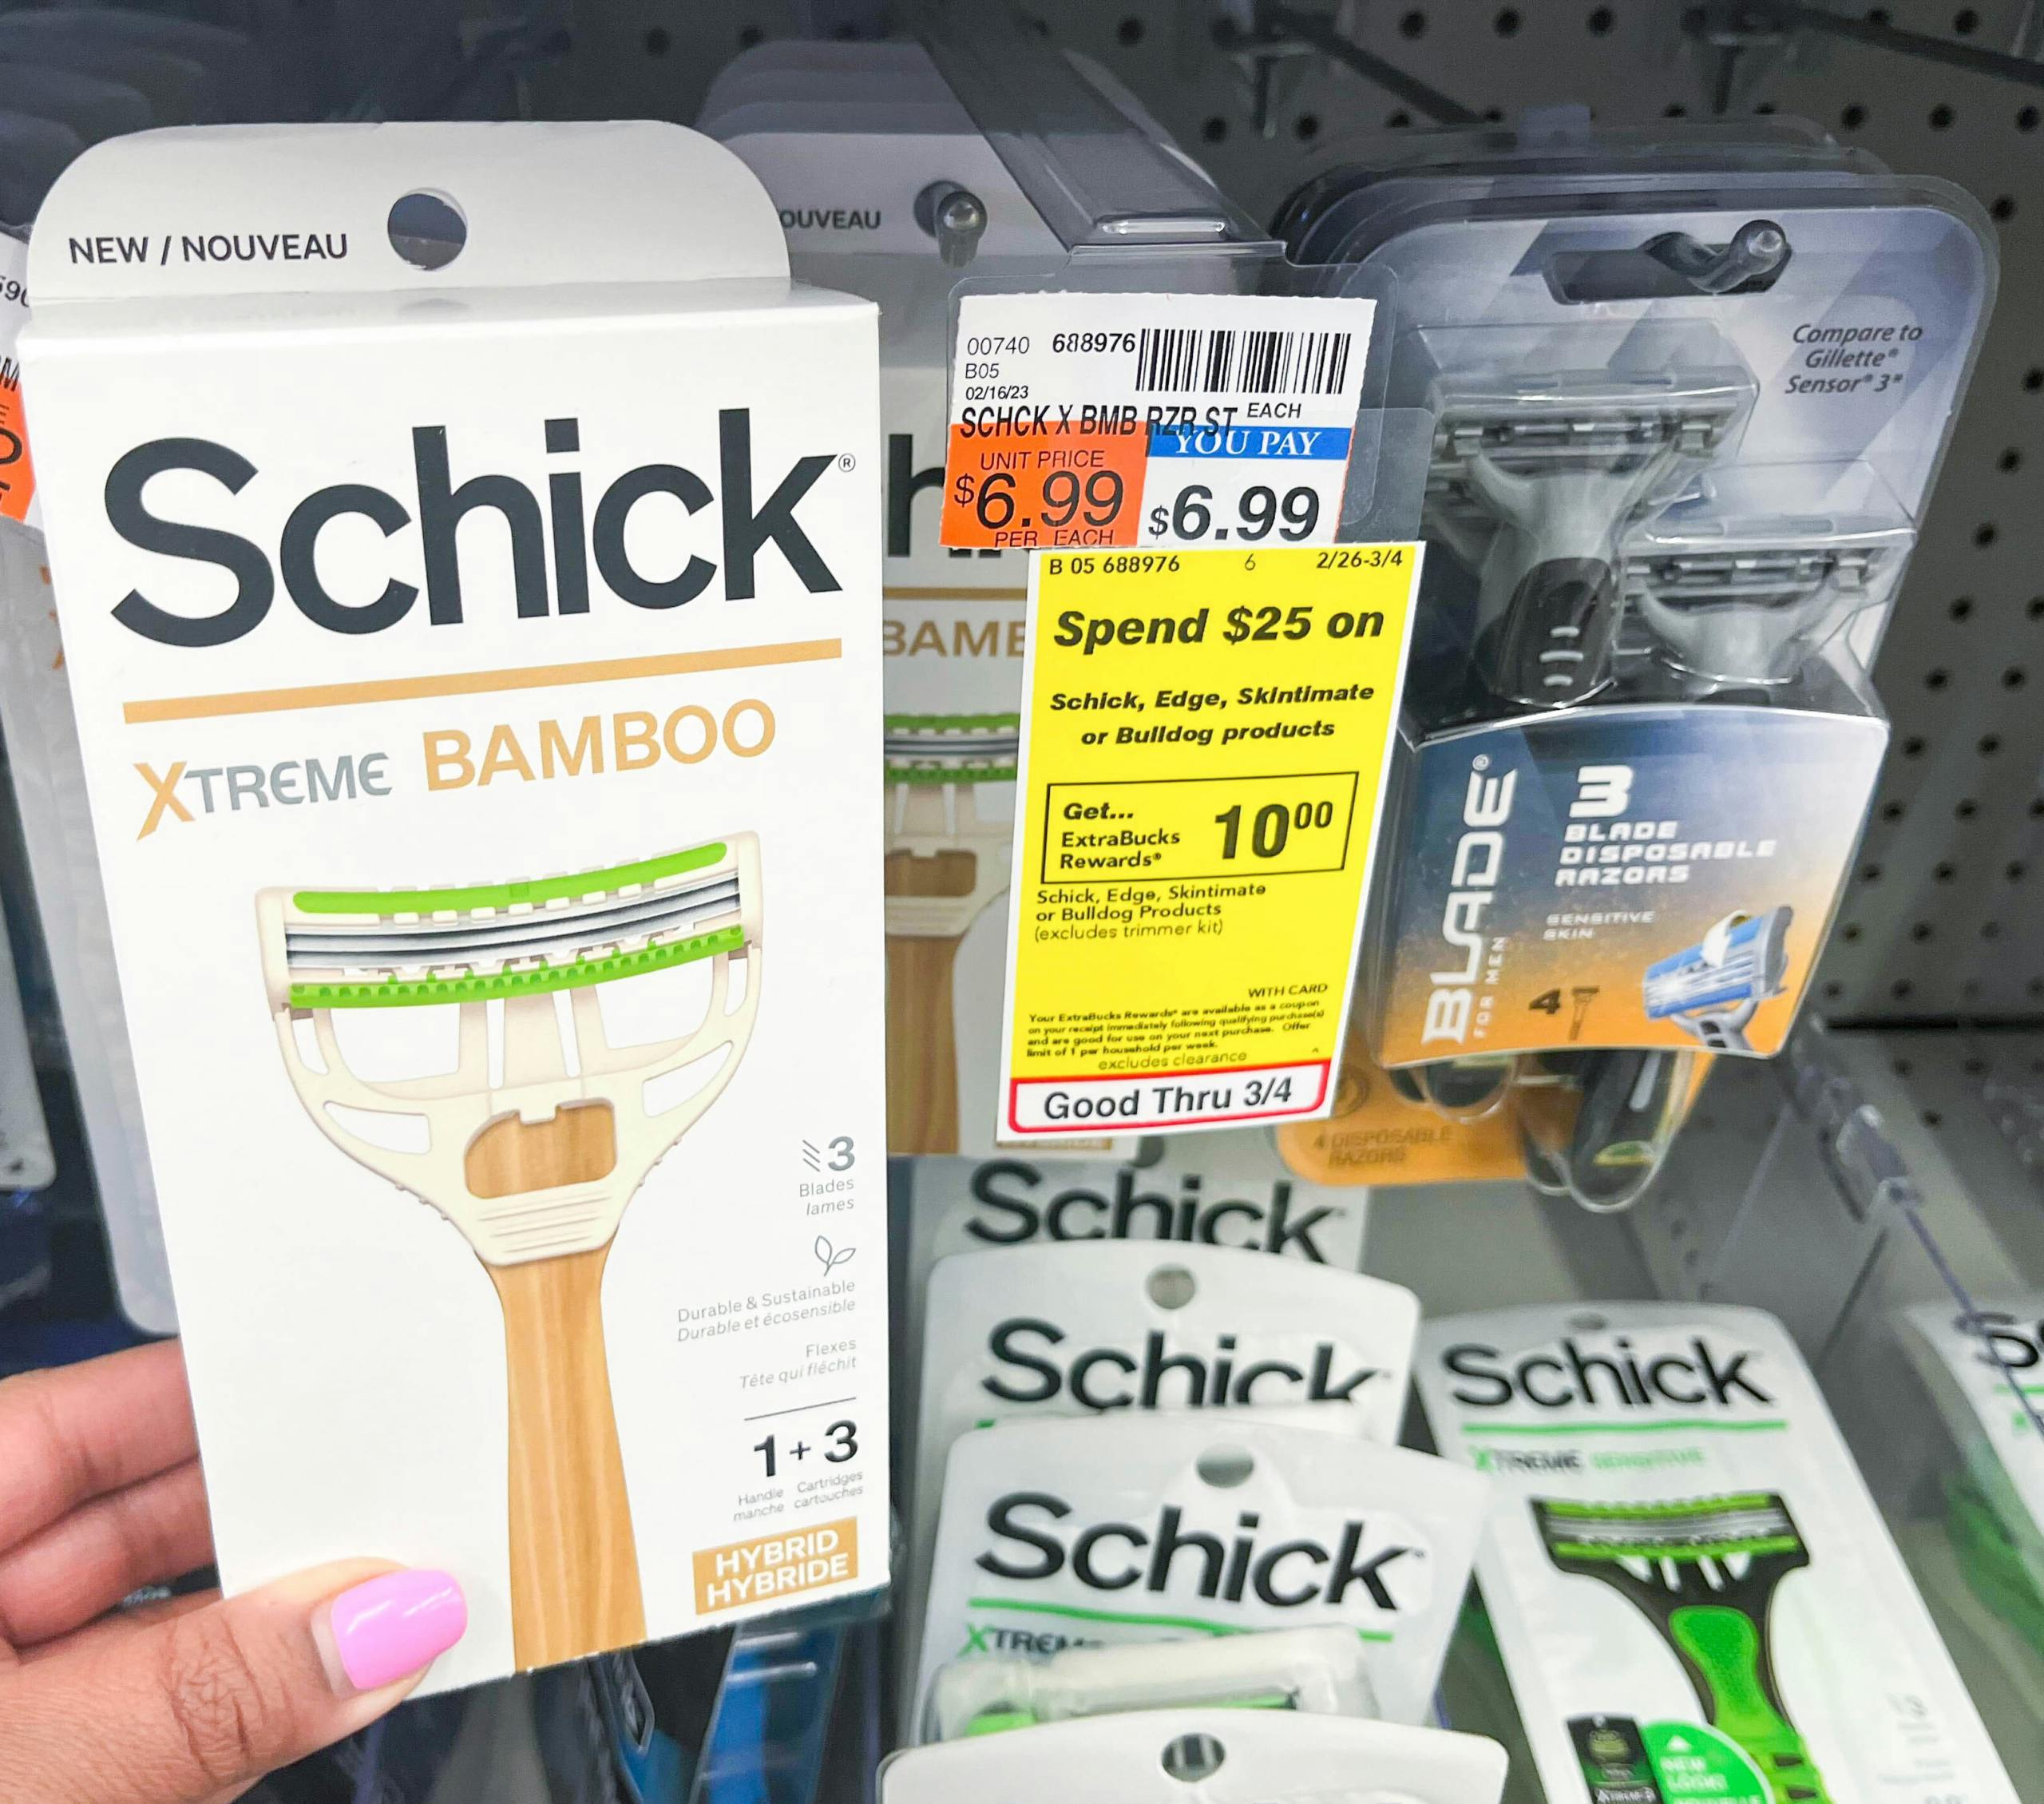 hand holding Schick Xtreme bamboo razor next to sales tag